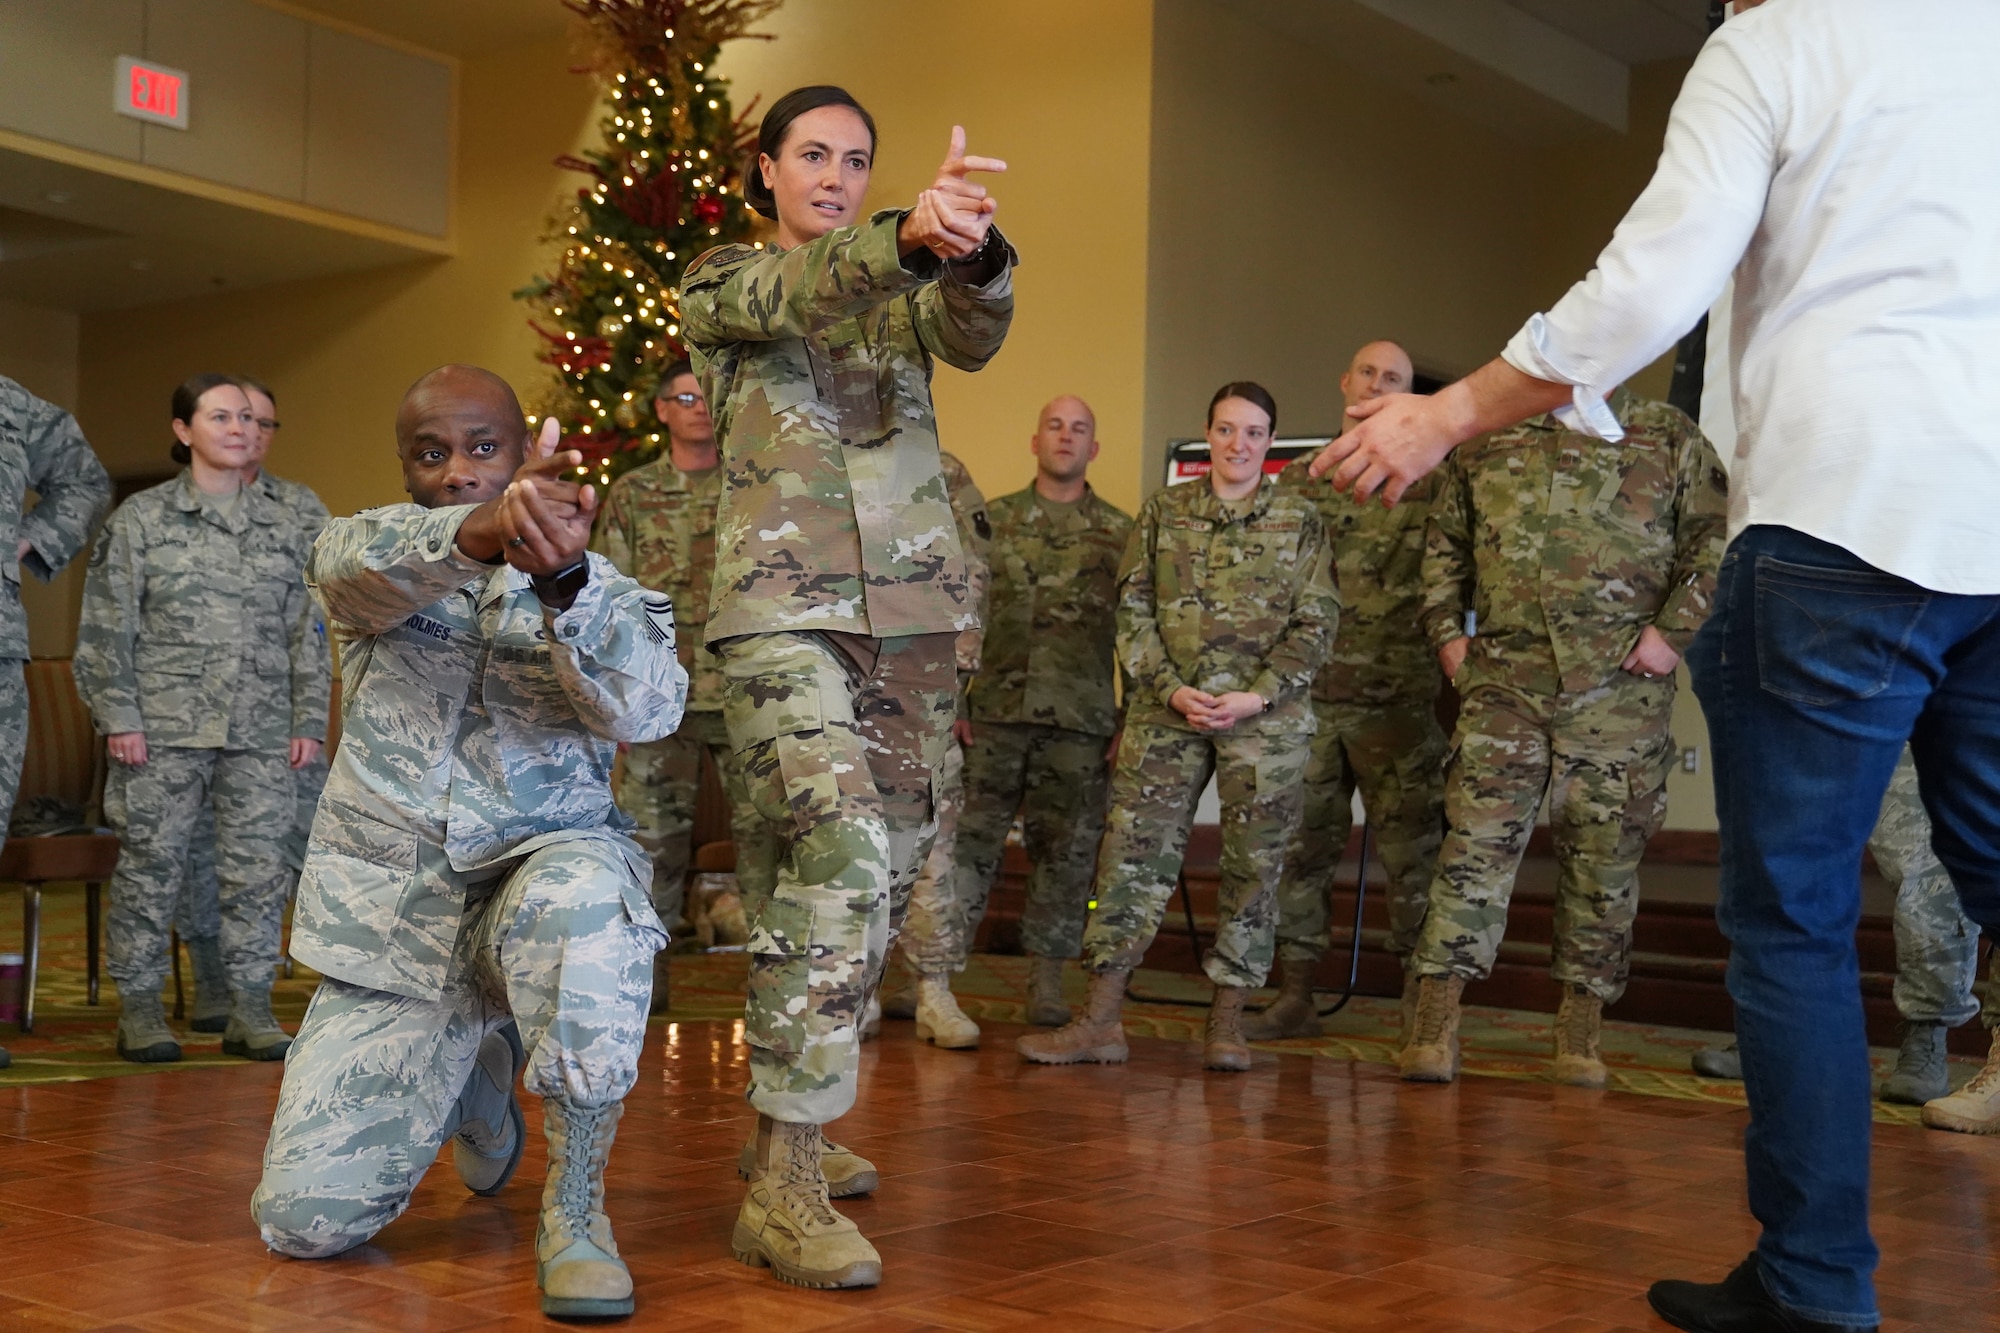 U.S. Air Force Col. Heather Blackwell, 81st Training Wing commander, and SMSgt. Patrick Holmes, 335th Training Squadron first sergeant, participate in an activity for the 'Improv to Improve' course in the Bay Breeze Event Center at Keesler Air Force Base, Mississippi, Dec. 10, 2019. Improv to Improve is an improvisation comedy resiliency class that engages military members in a safe interactive learning environment. The purpose of the class is to help combat life stress and adversity in an unconventional way. (U.S. Air Force photo by Airman 1st Class Spencer Tobler)